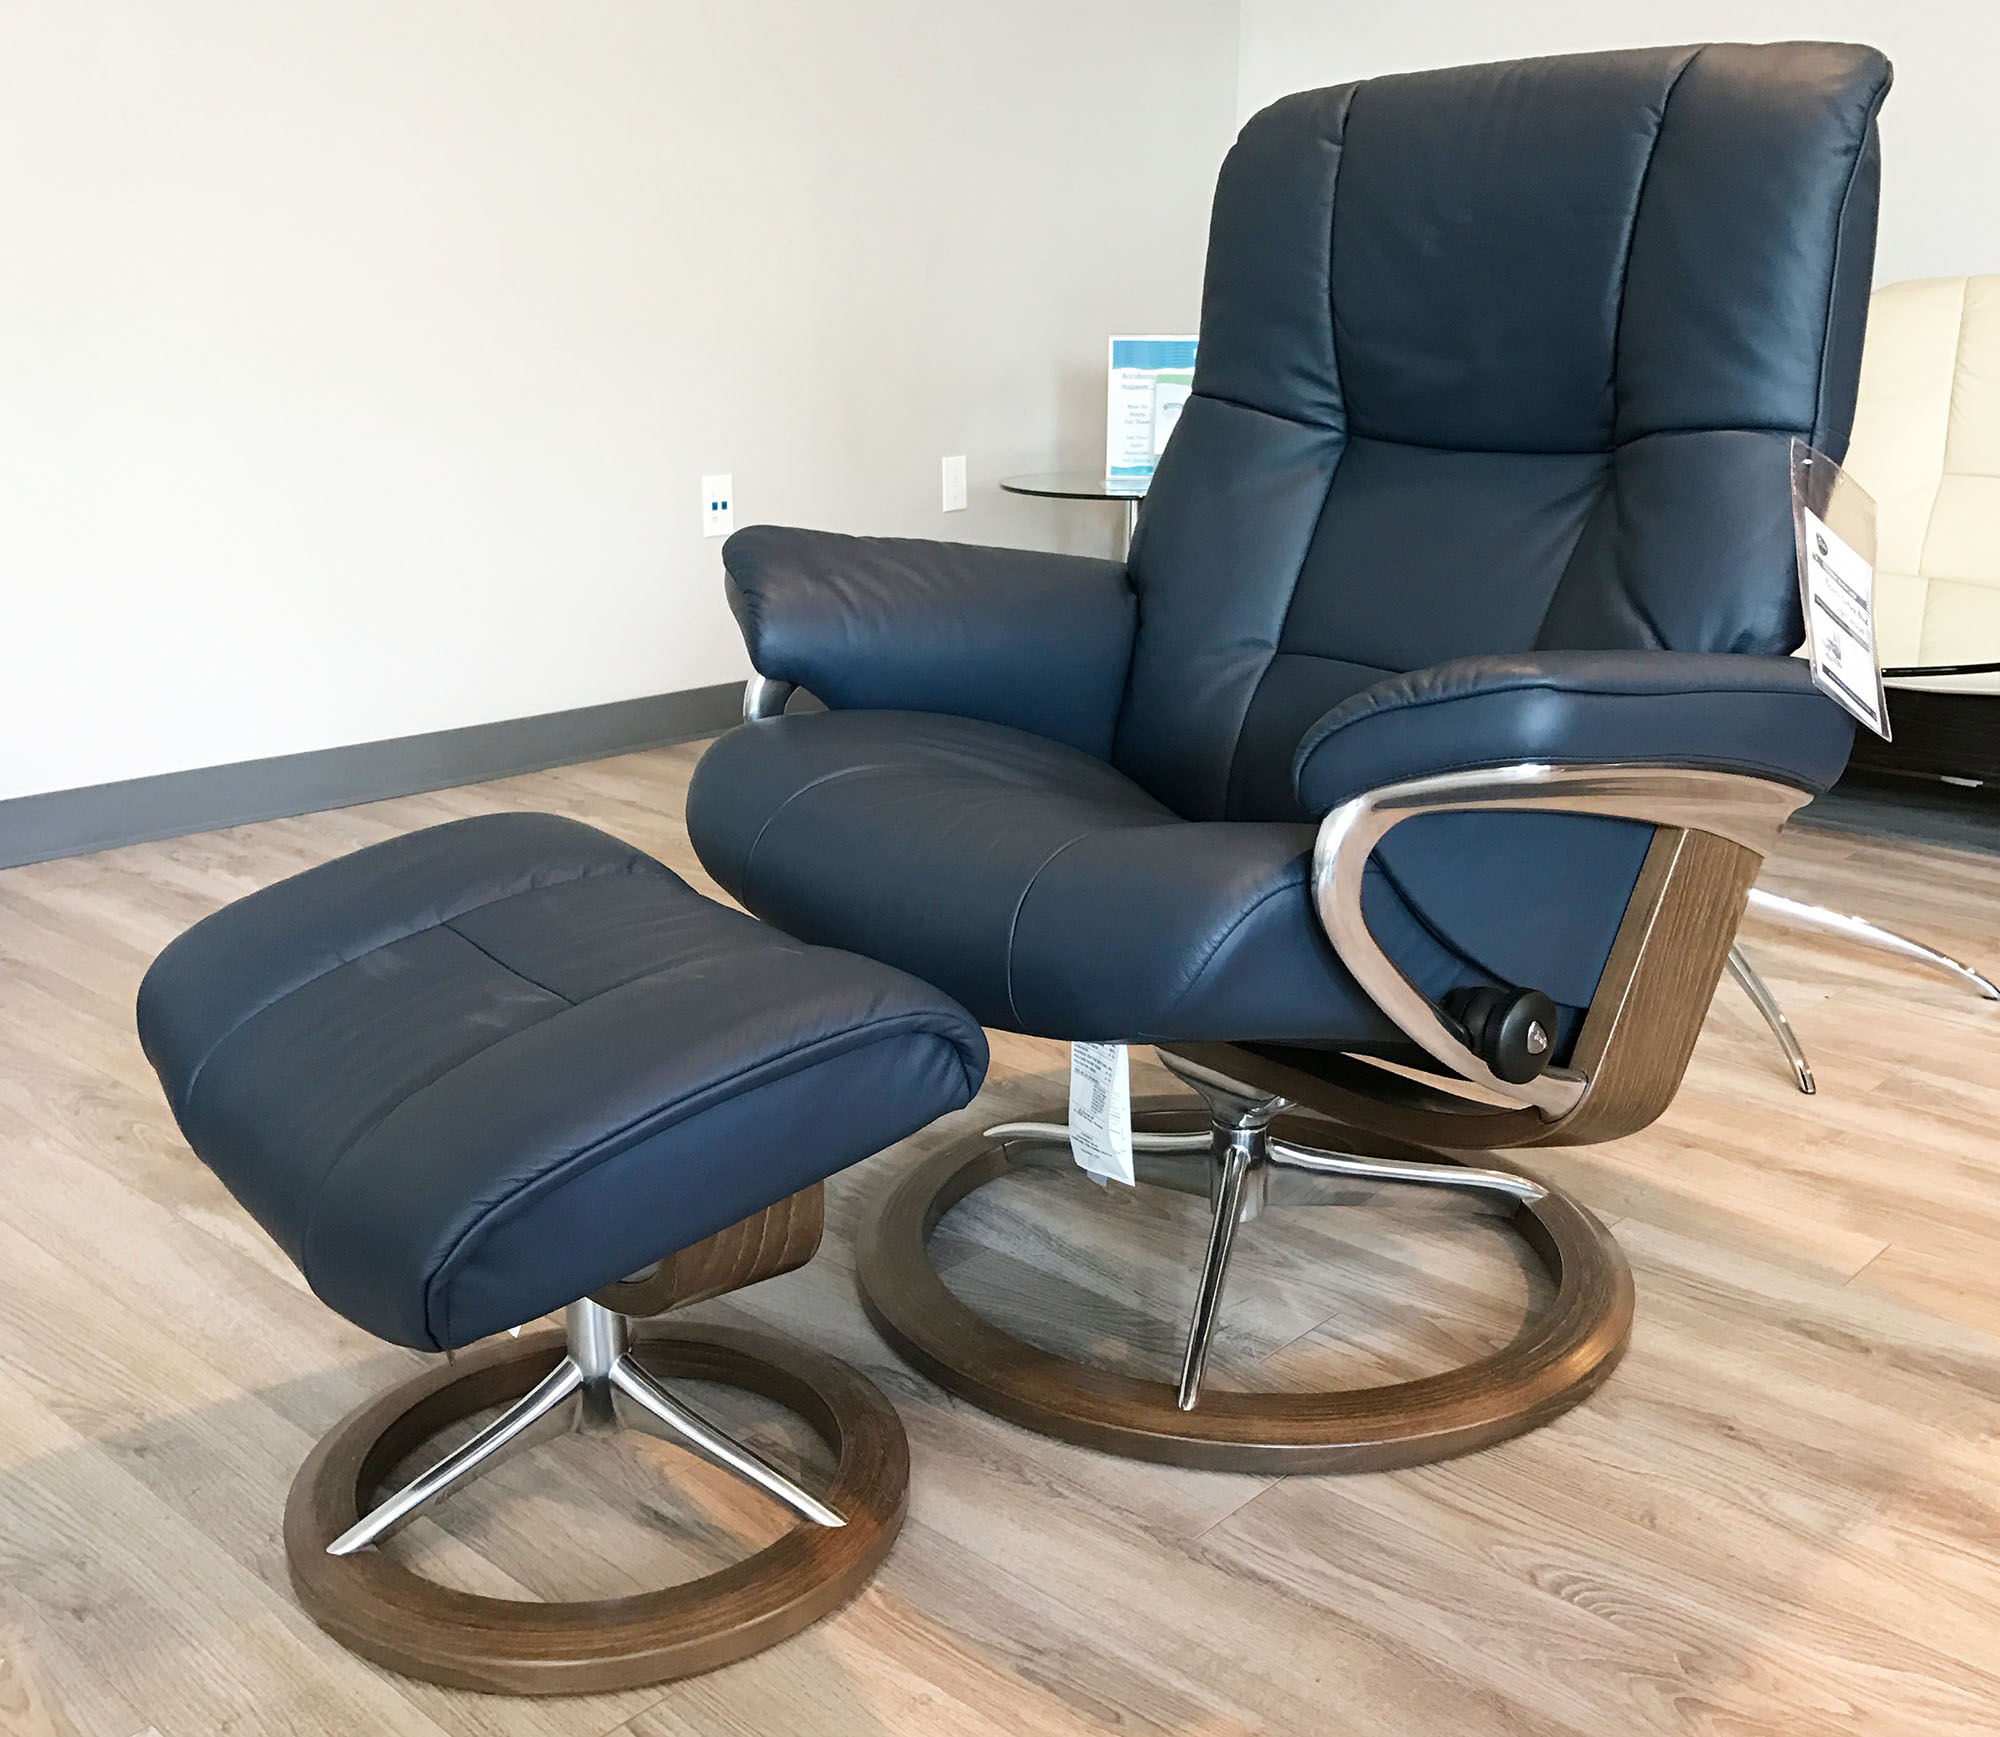 Stressless Mayfair Signature Walnut, Navy Leather Recliner Chairs